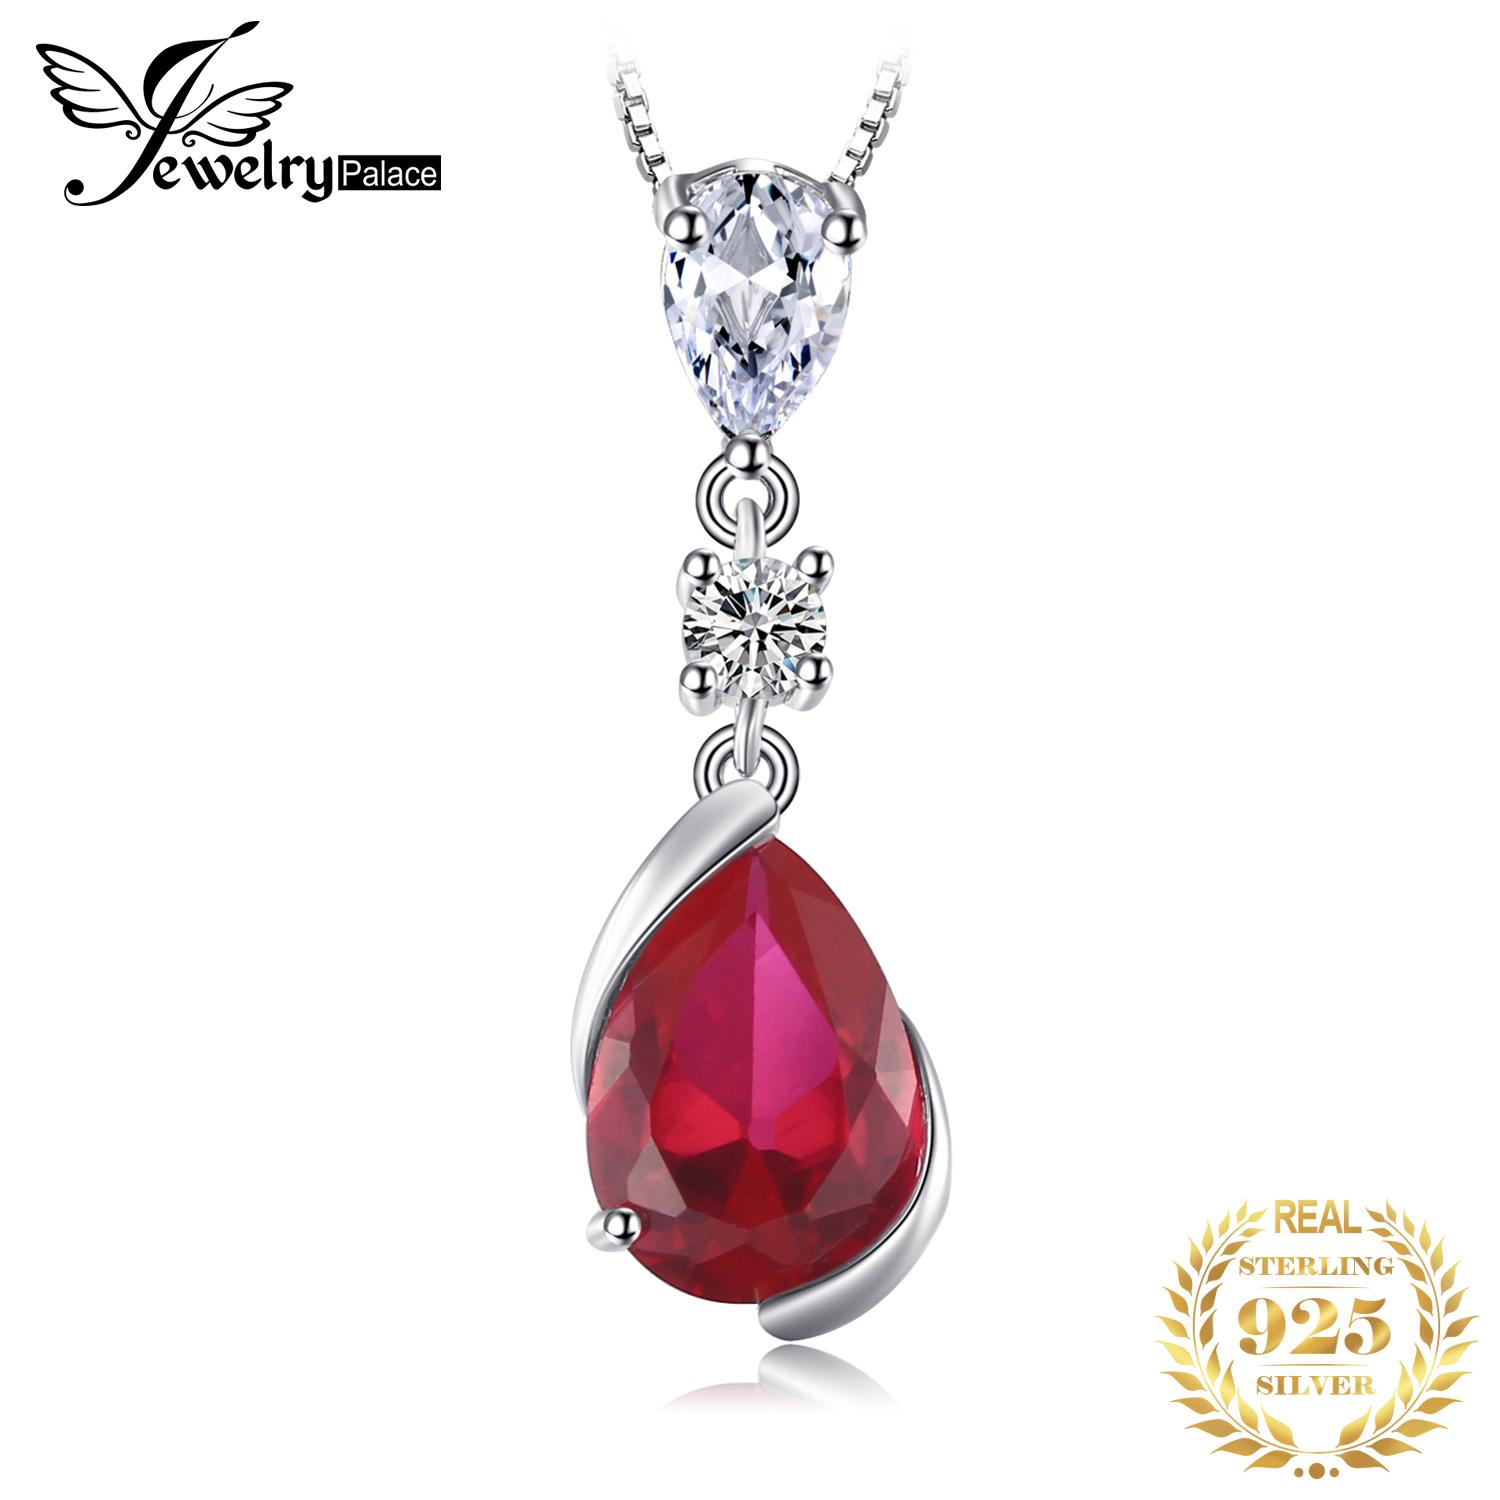 Taylor Erotic Lingerie JewelryPalace 2.6ct Pear Created Red Ruby 925 Sterling Silver Pendant Necklace for Woman Fashion Gemstone Jewelry No Chain